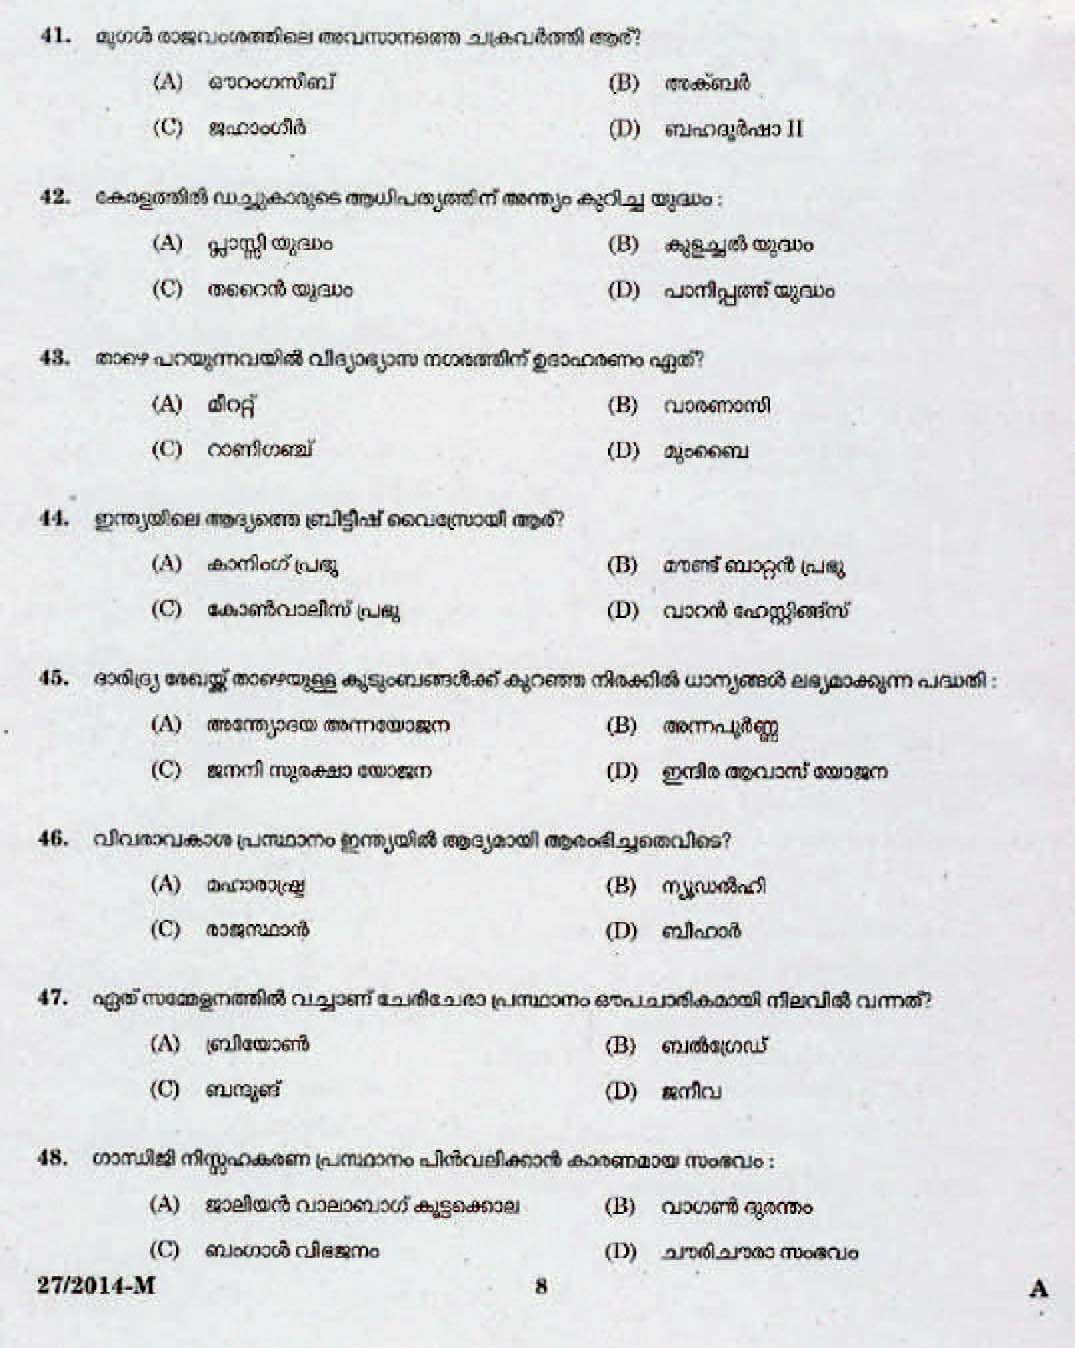 LD Clerk All Districts Question Paper Malayalam 2014 Paper Code 272014 M 6